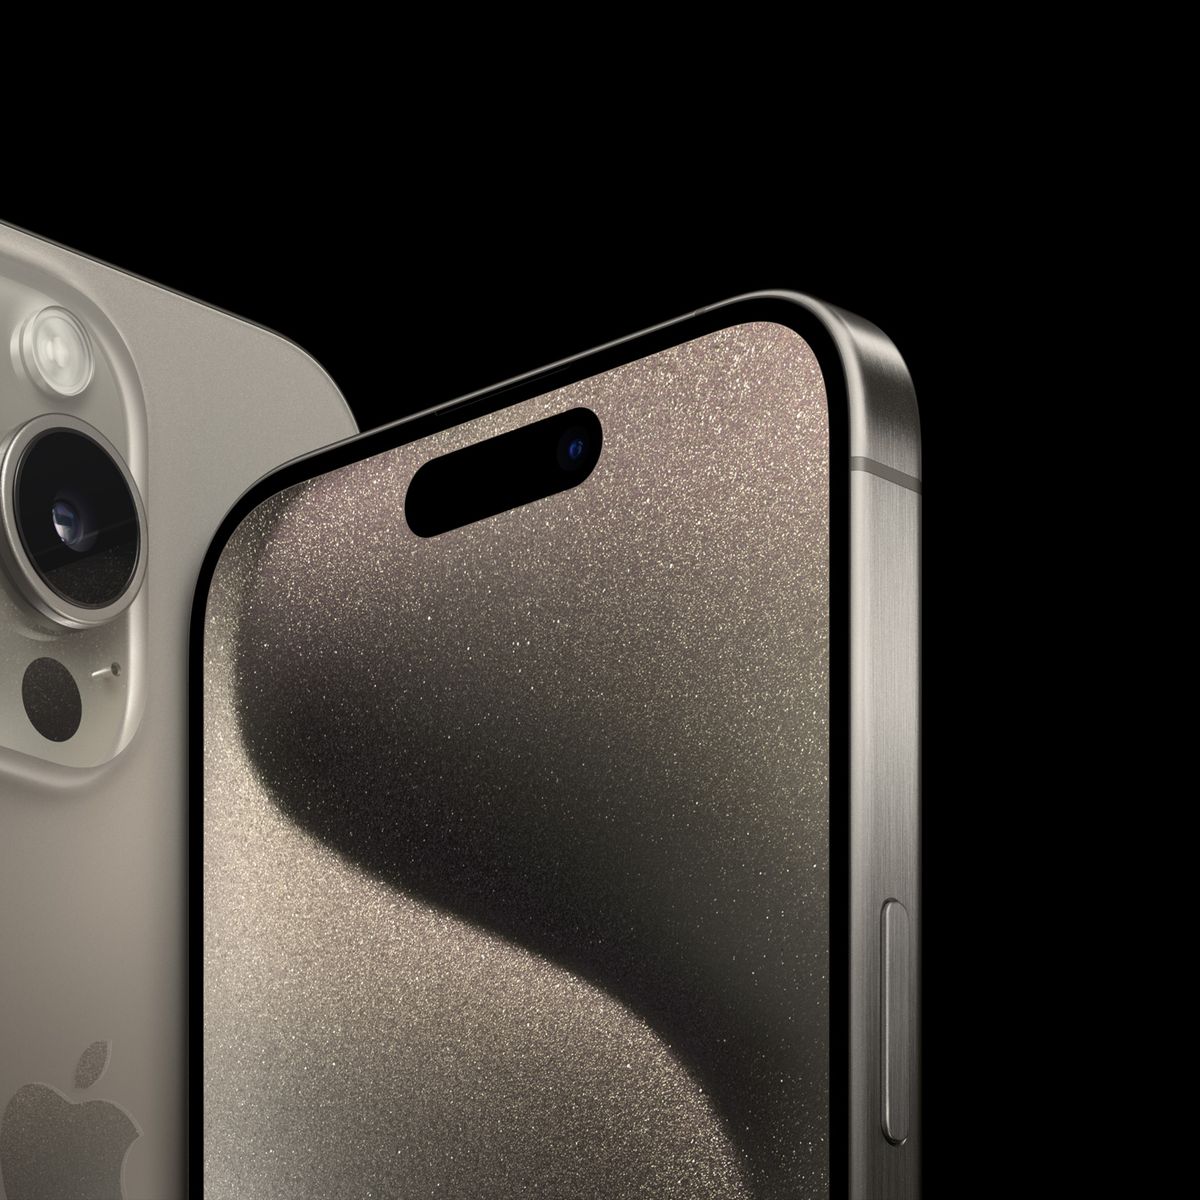 iPhone 15 Pro Base Models Could Potentially Record 4K ProRes Video As Apple  Aims To Increase Storage To 256GB